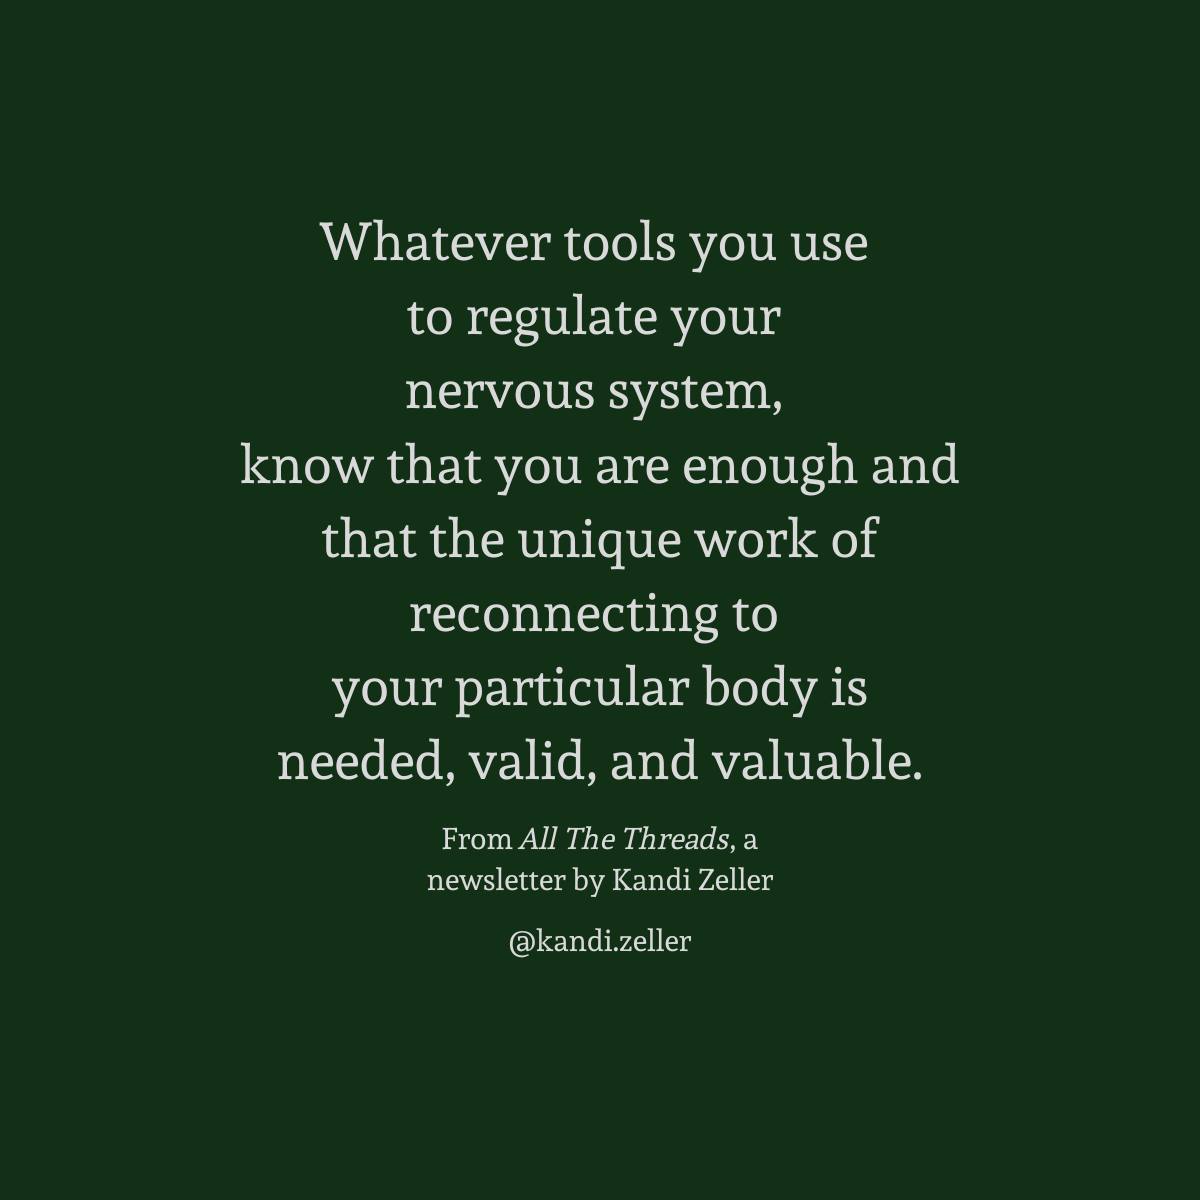 A dark green background with white lettering that reads, “Whatever tools you use to regulate your nervous system, know that you are enough and that the unique work of reconnecting to your particular body is needed, valid, and valuable.” This is followed by the words, “From All The Threads, a newsletter by Kandi Zeller, @Kandi.Zeller”